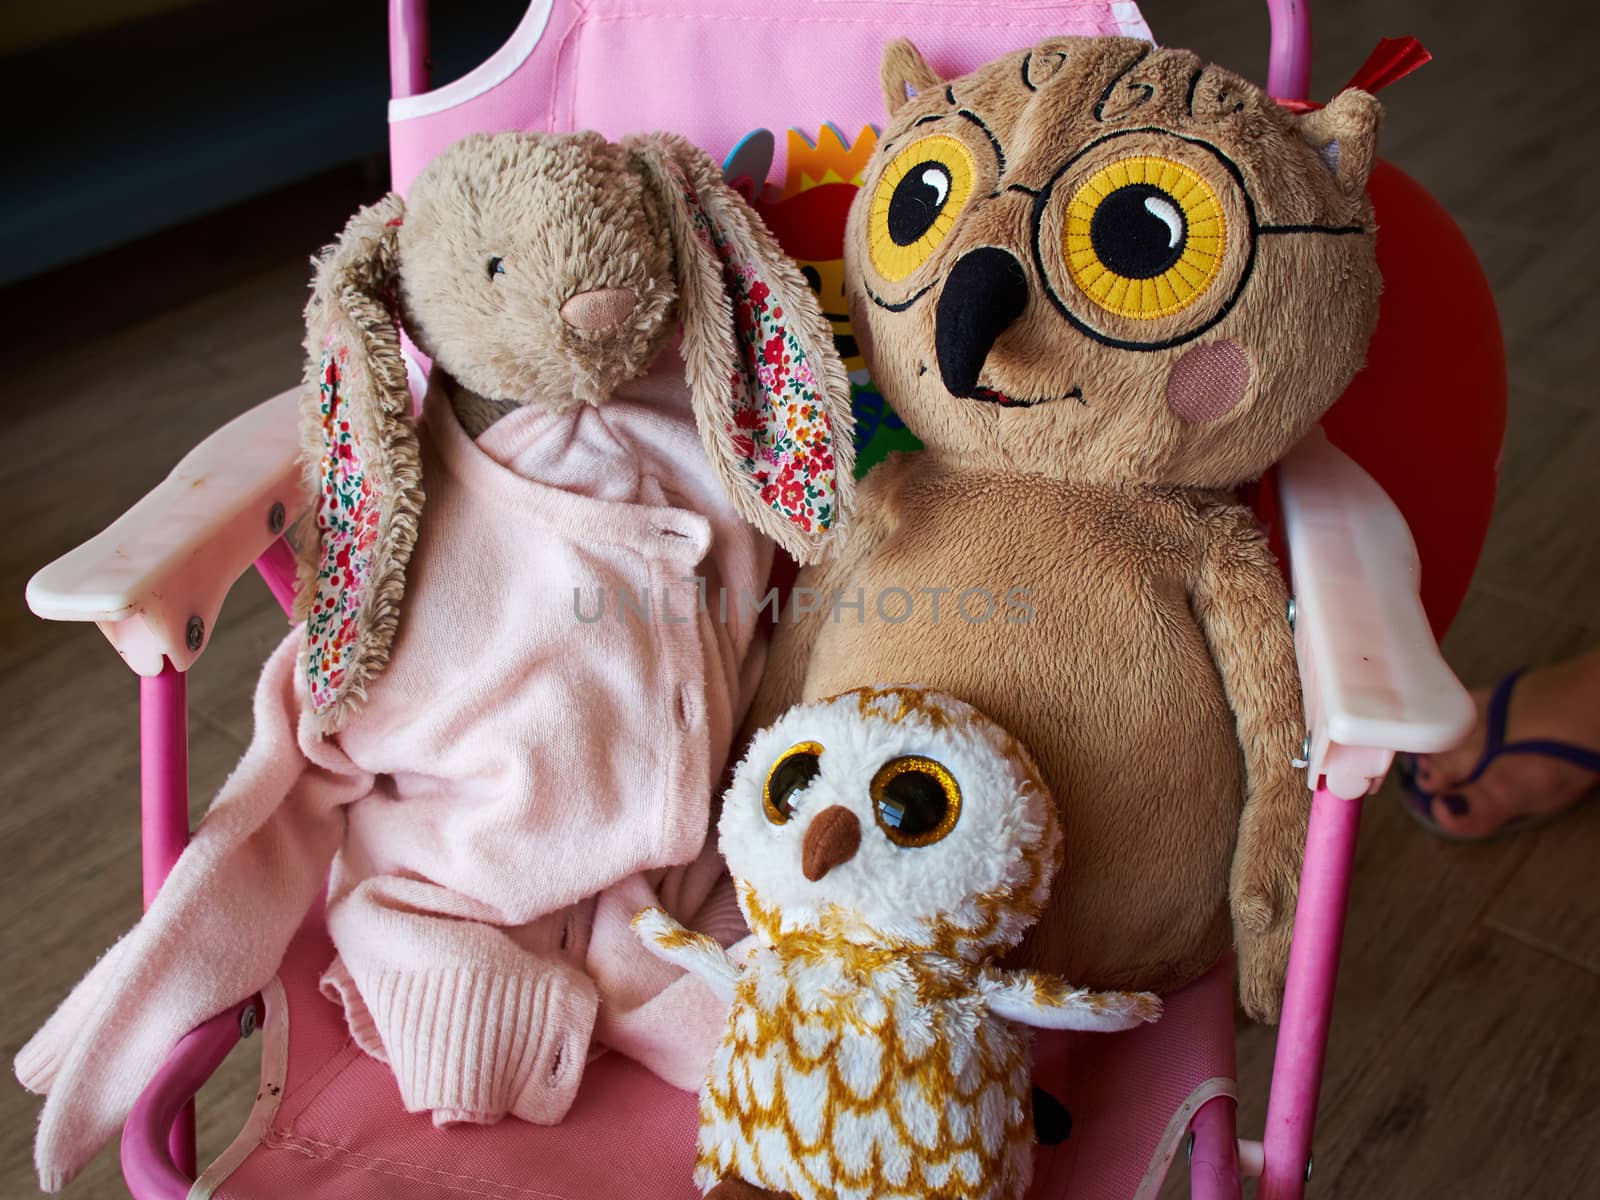 Soft stuffed animal toys in a child's bedroom by Ronyzmbow